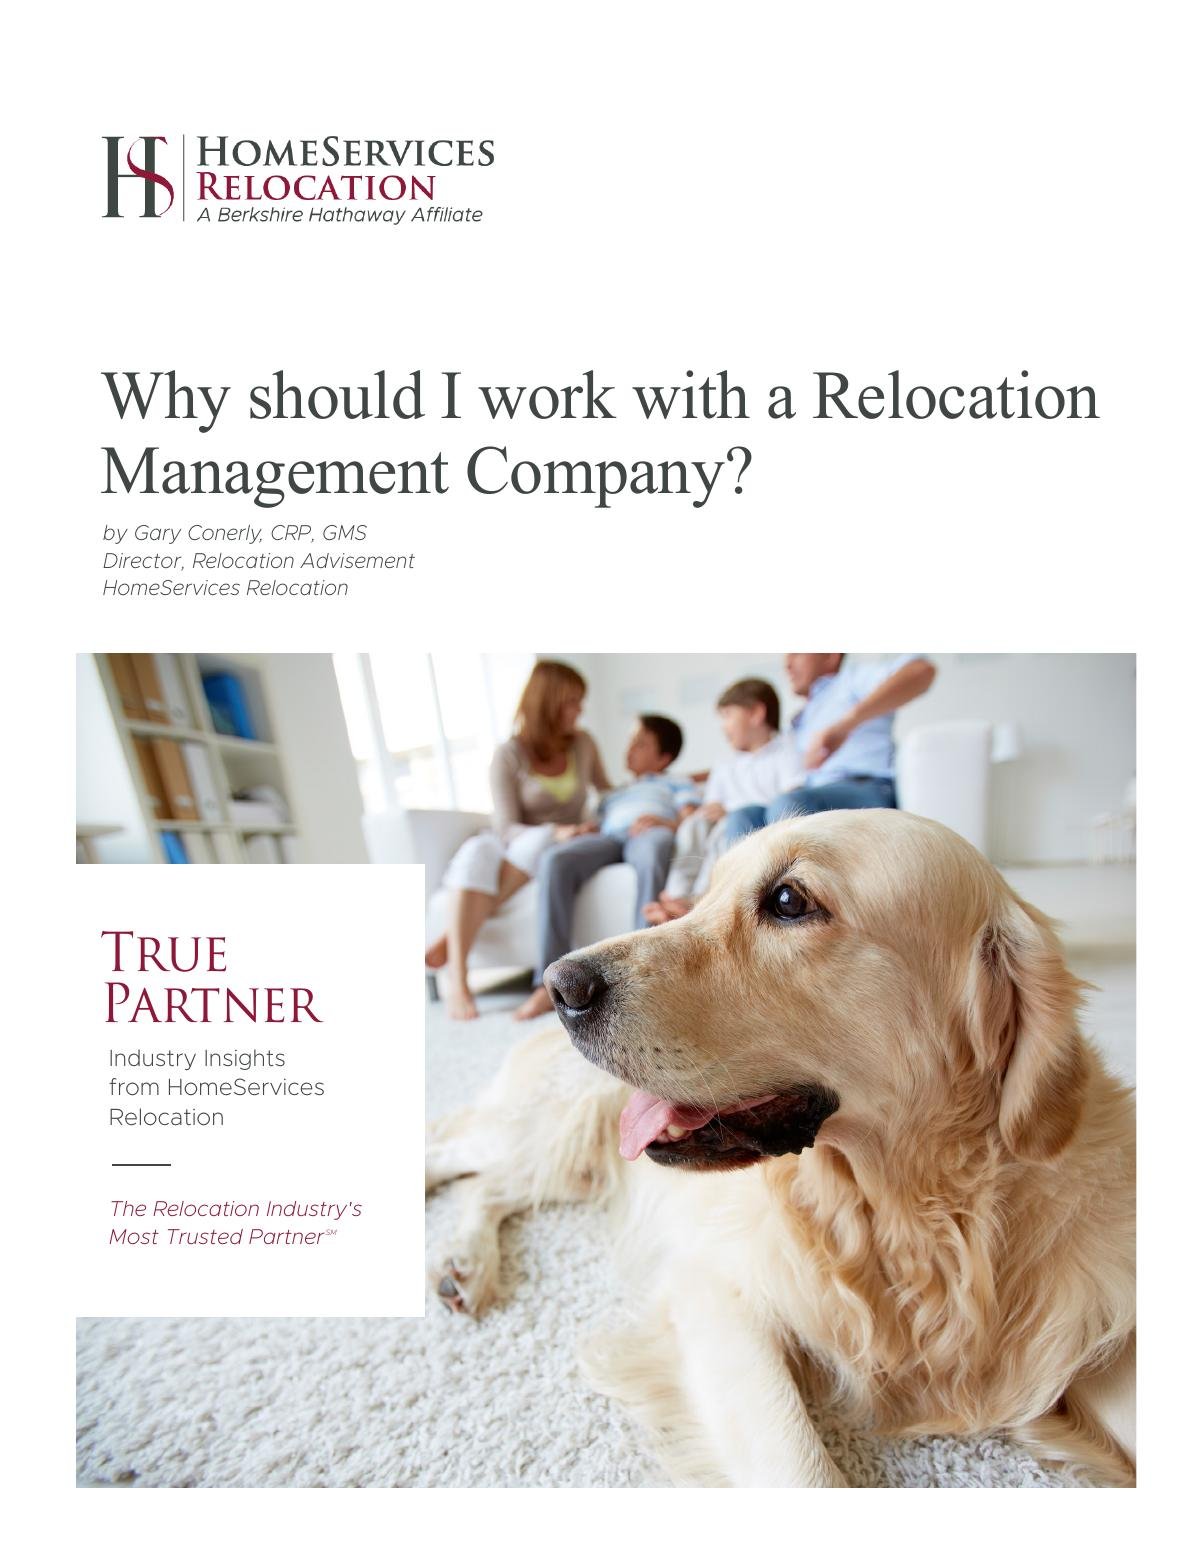 Top 10 reasons to work with a Relocation Management Company